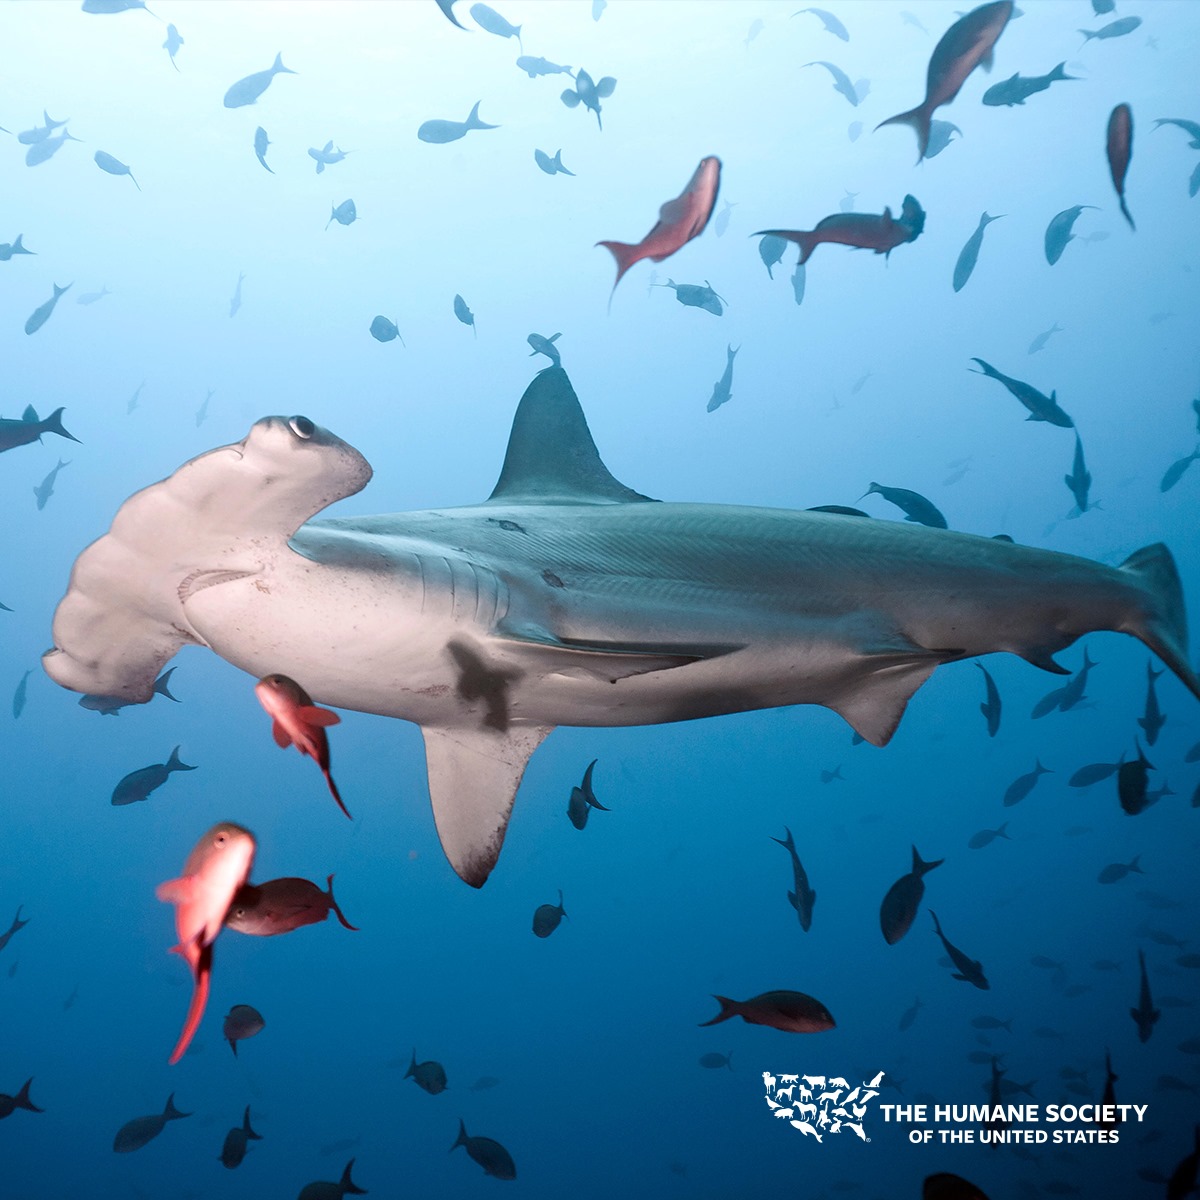 Love for Living Animals: The Pondicherry Shark, Most Endangered by Shark  Fin Soup, Hugs When it Mates, and Visits an “Underwater Spa” annually